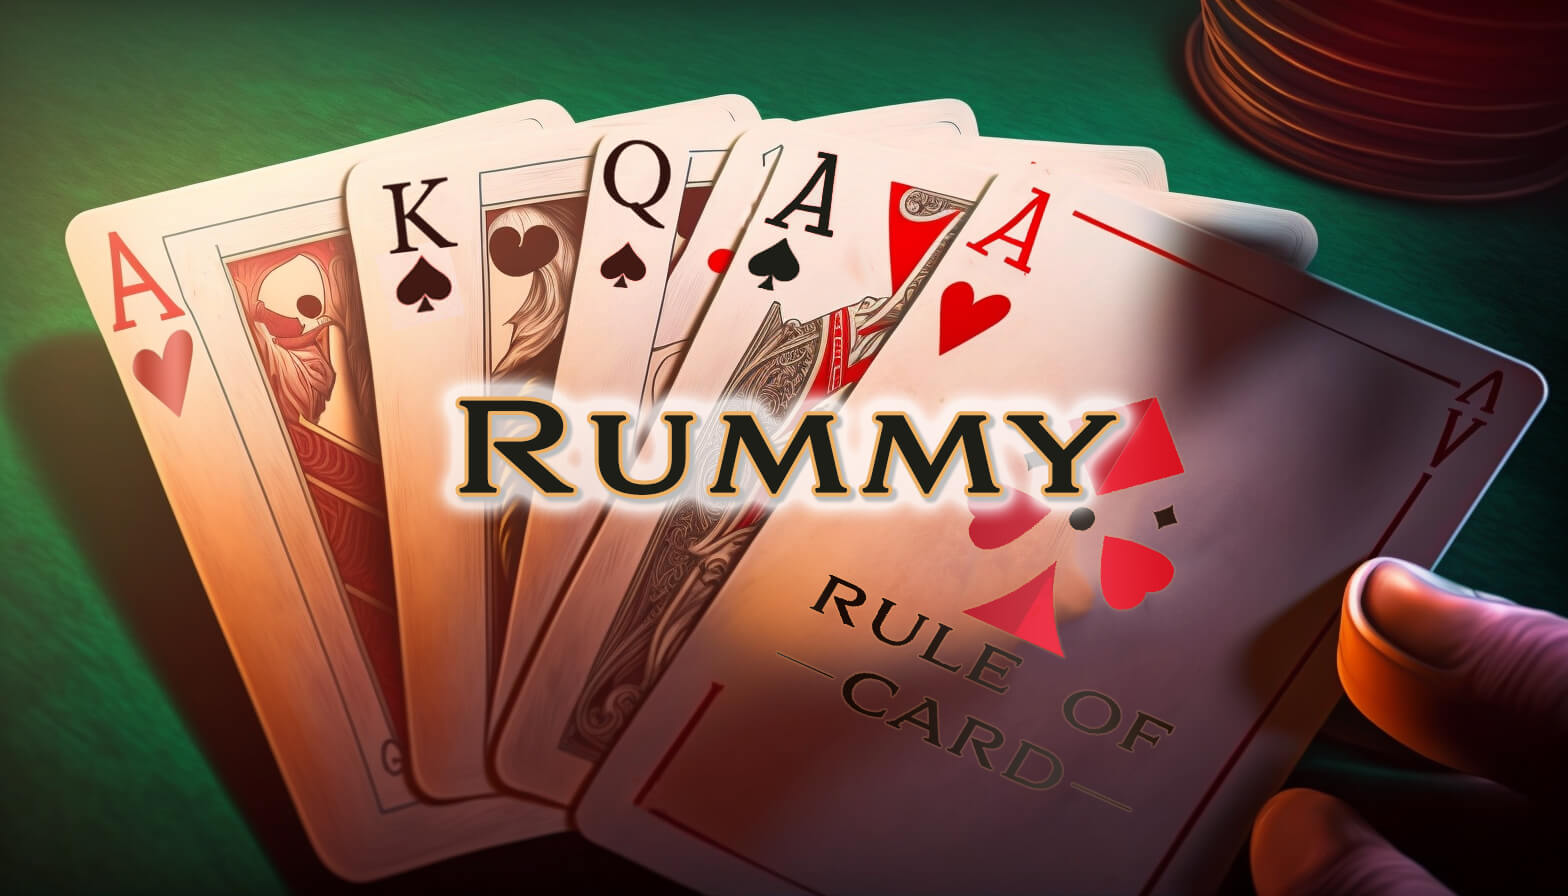 Playing the card game Rummy